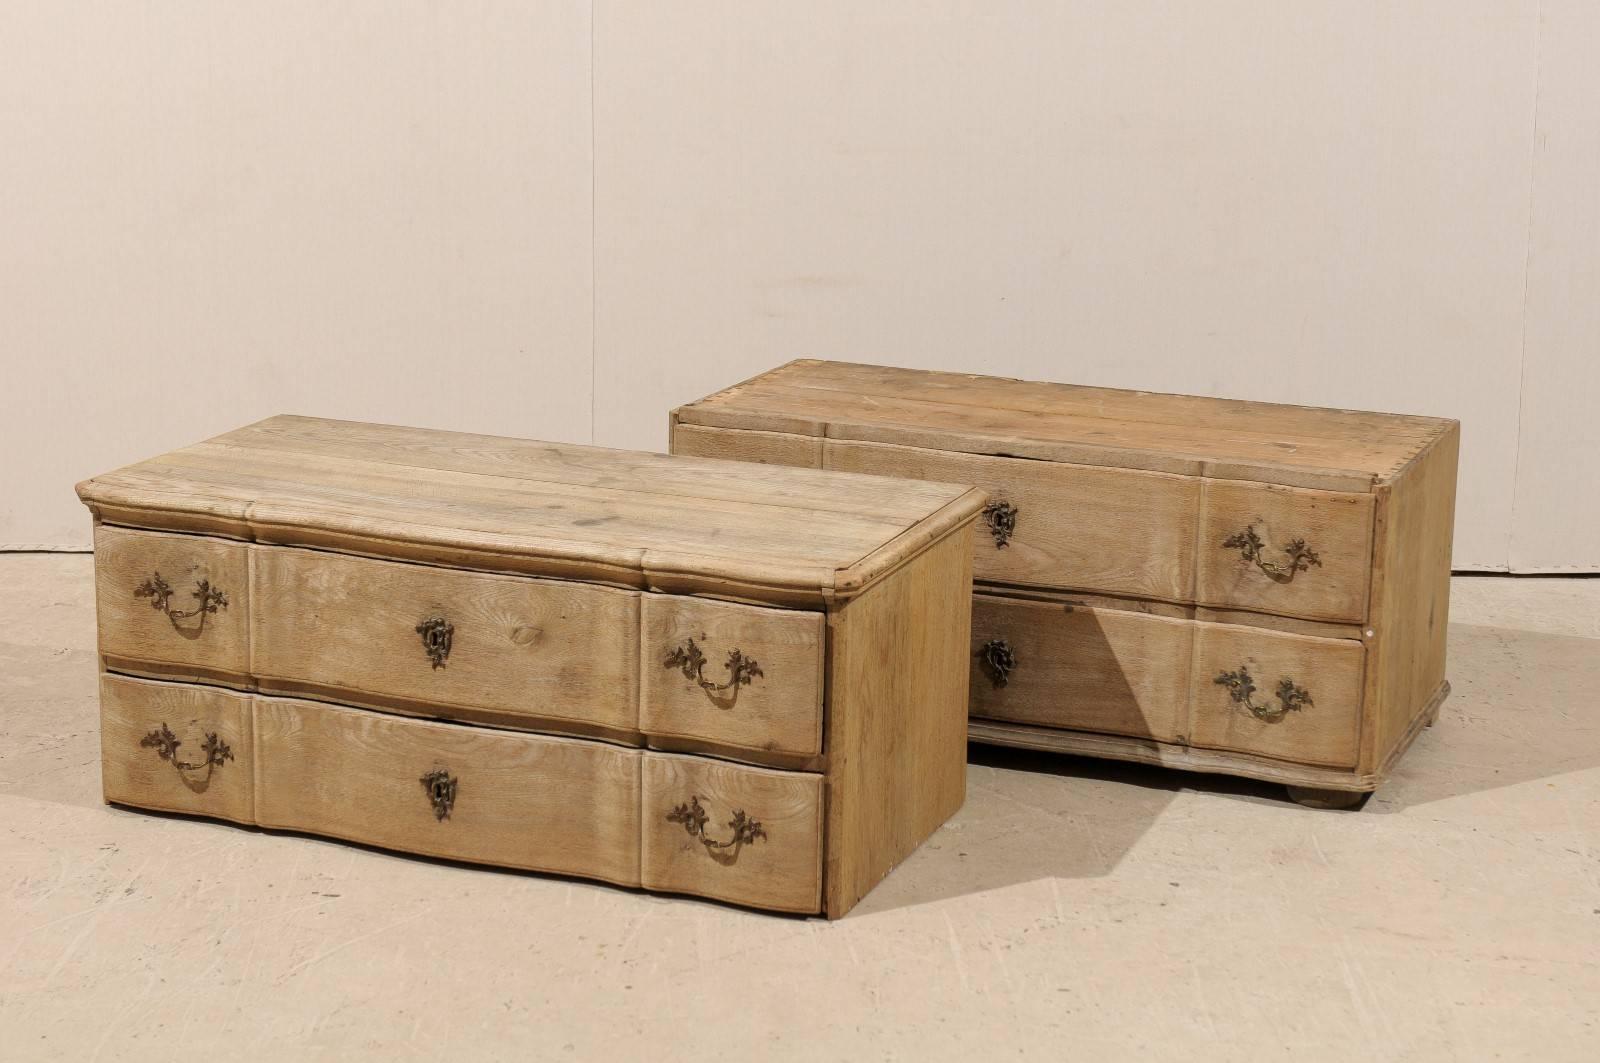 Wood Dutch Mid-19th Century Chest with Four Drawers Featuring Rococo Style Hardware